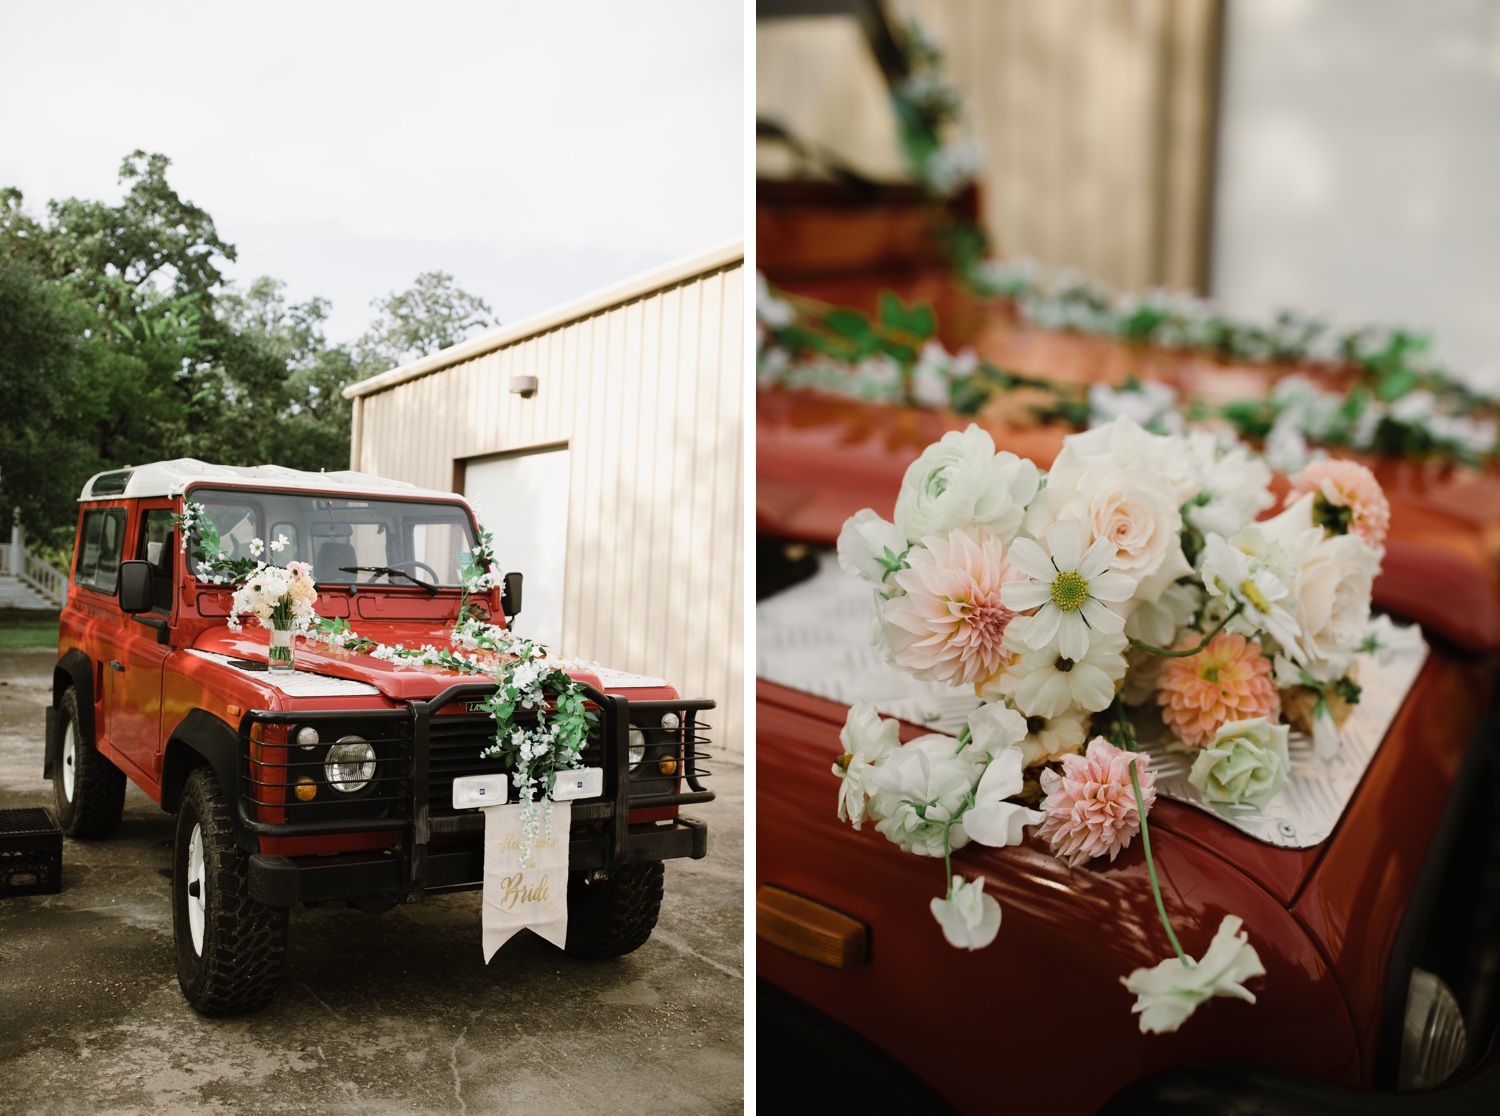 Wedding Jeep decorated with flowers and a 'Just Married' sign